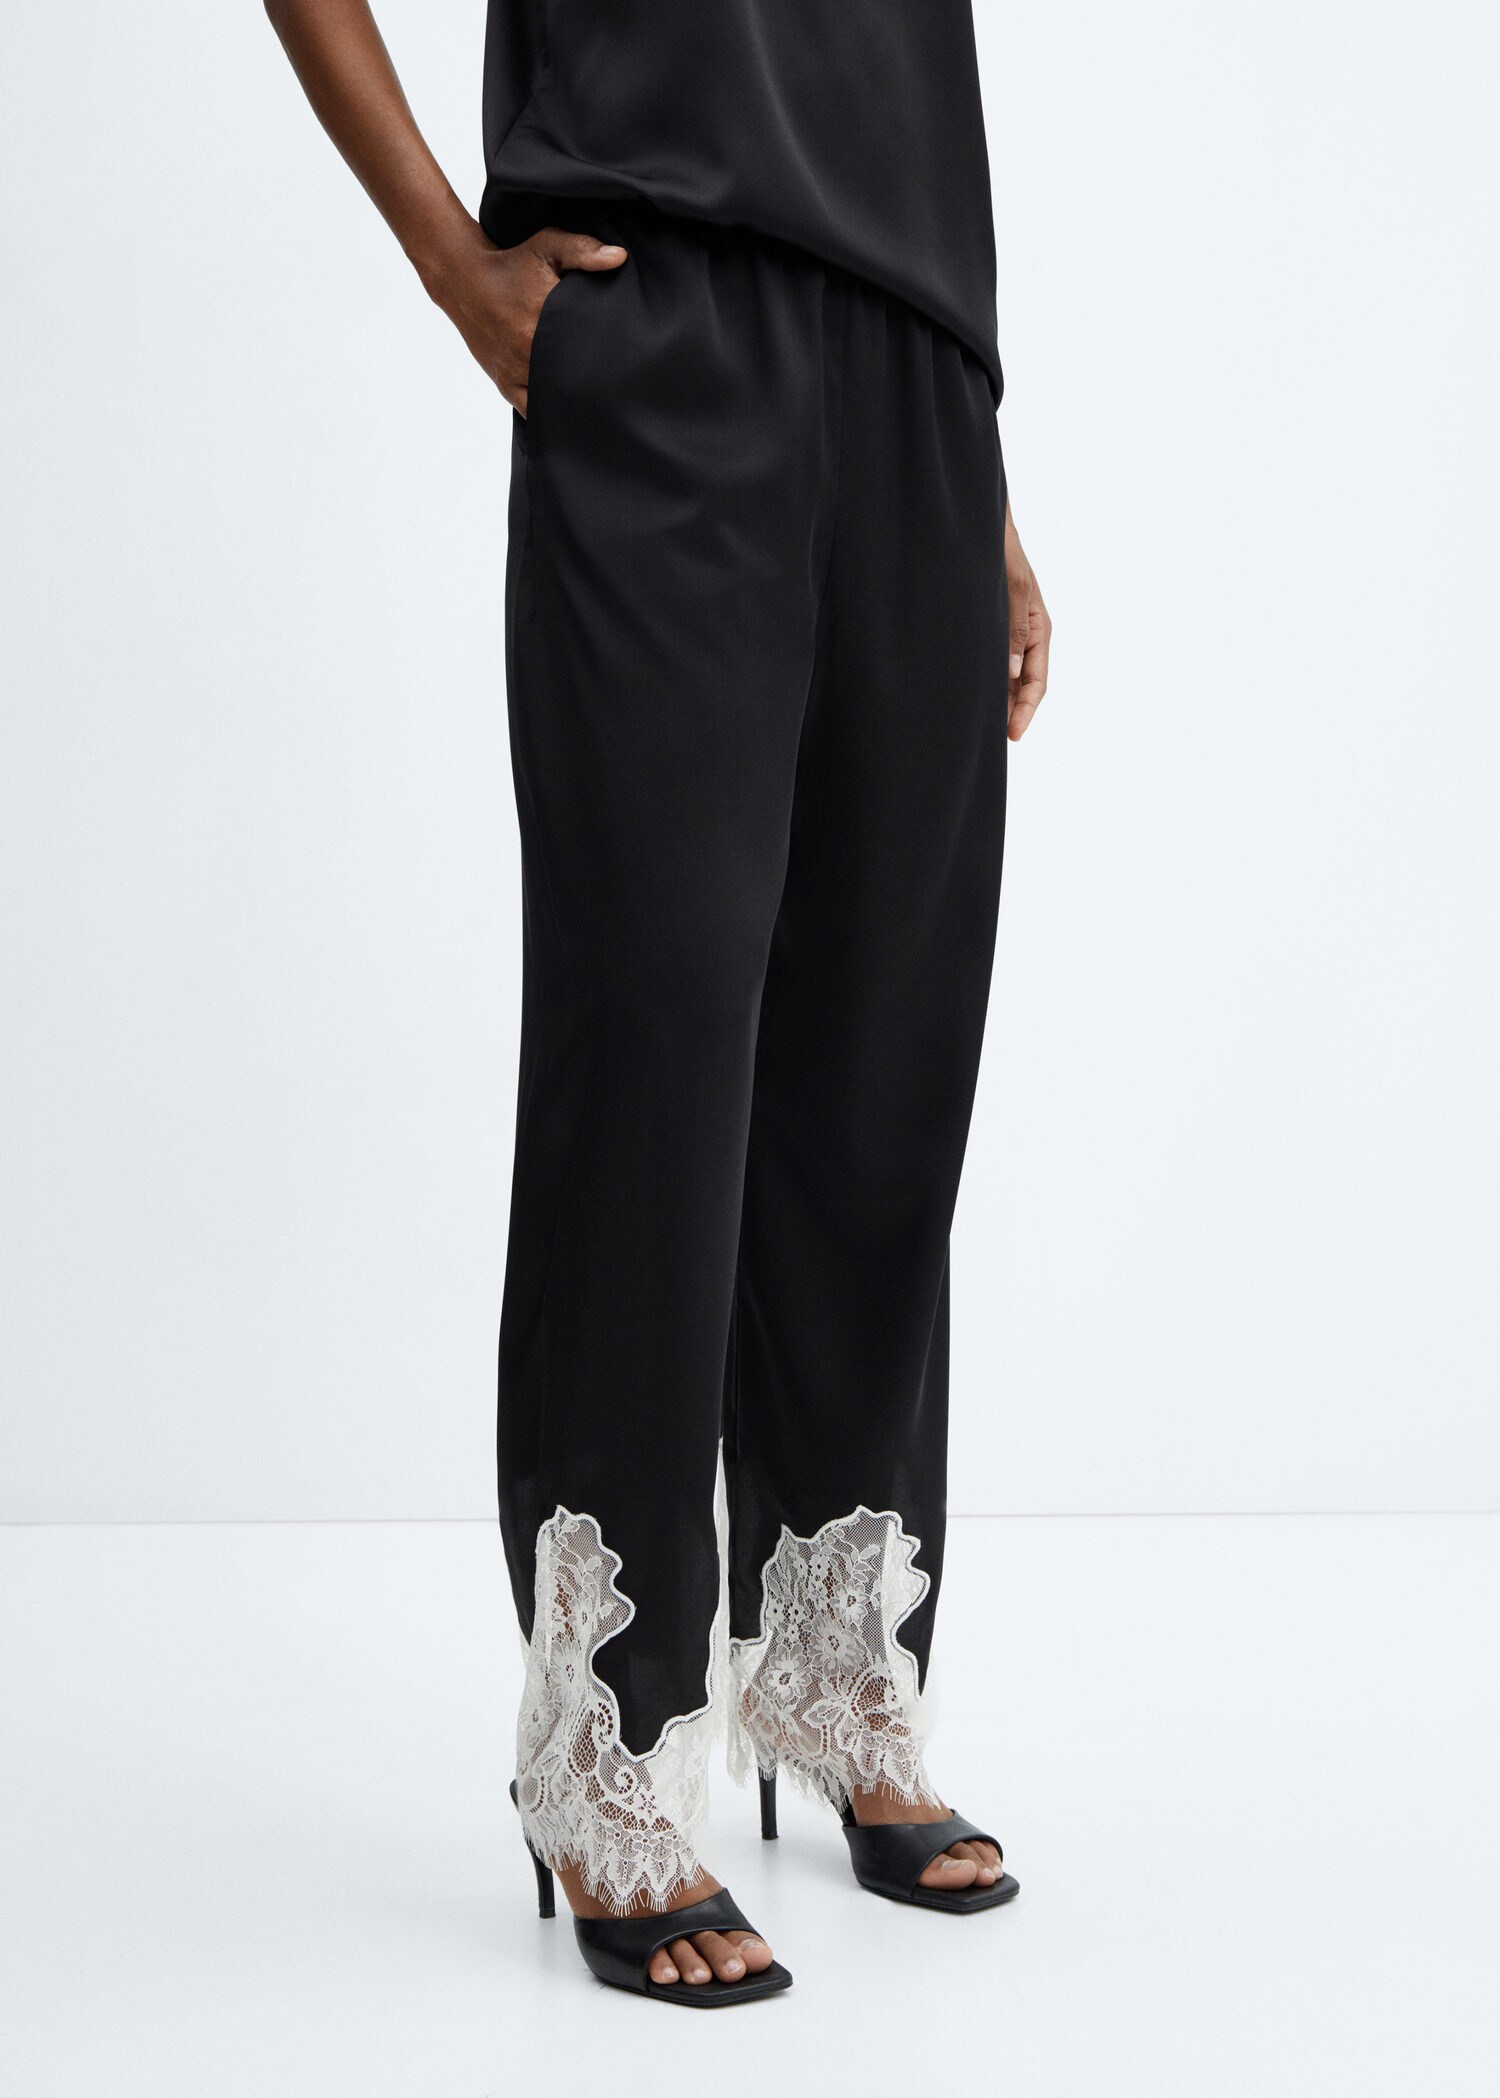 Trousers with lace hem detail